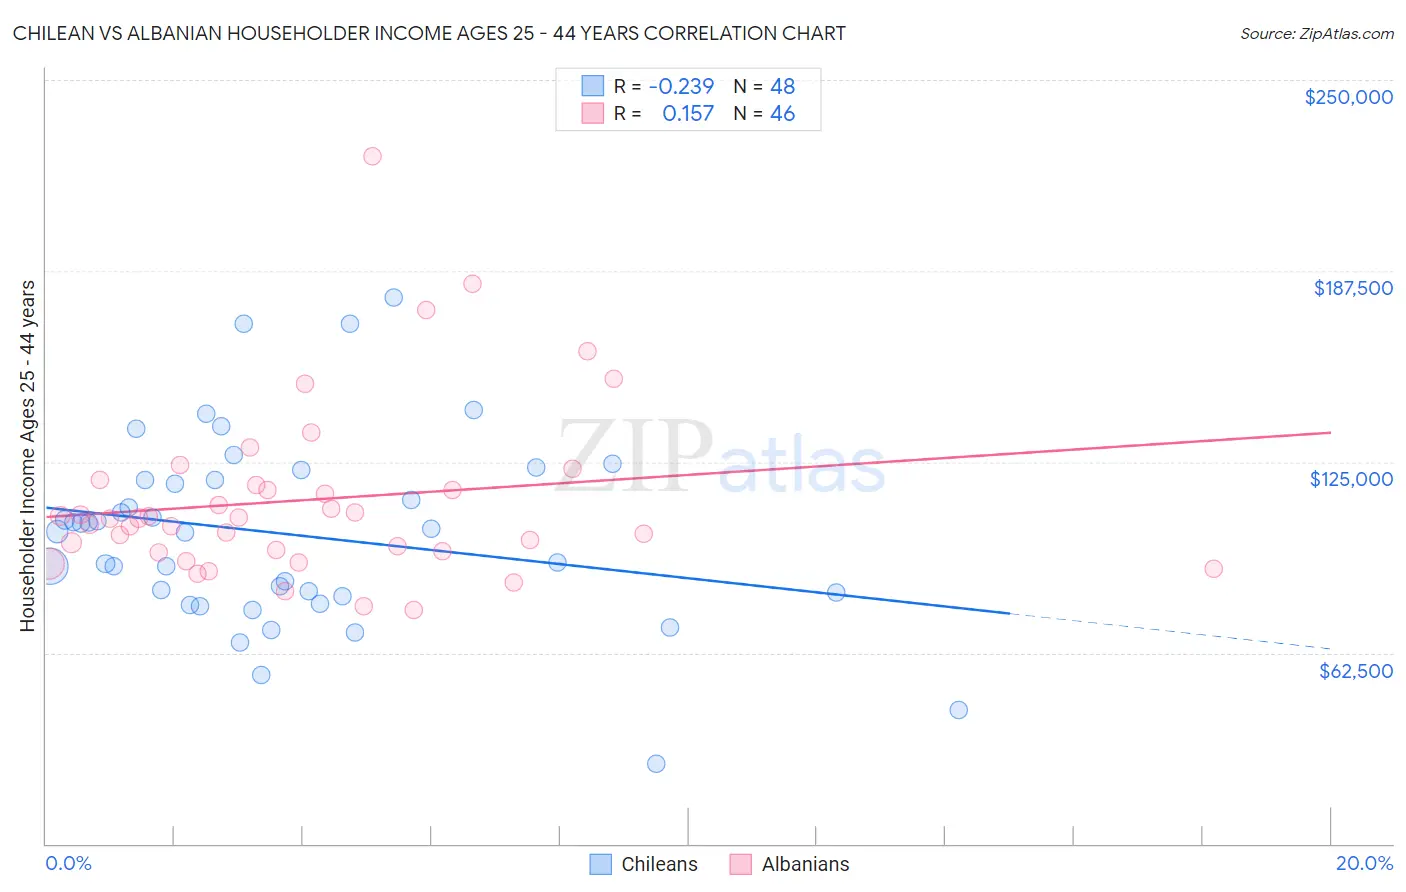 Chilean vs Albanian Householder Income Ages 25 - 44 years